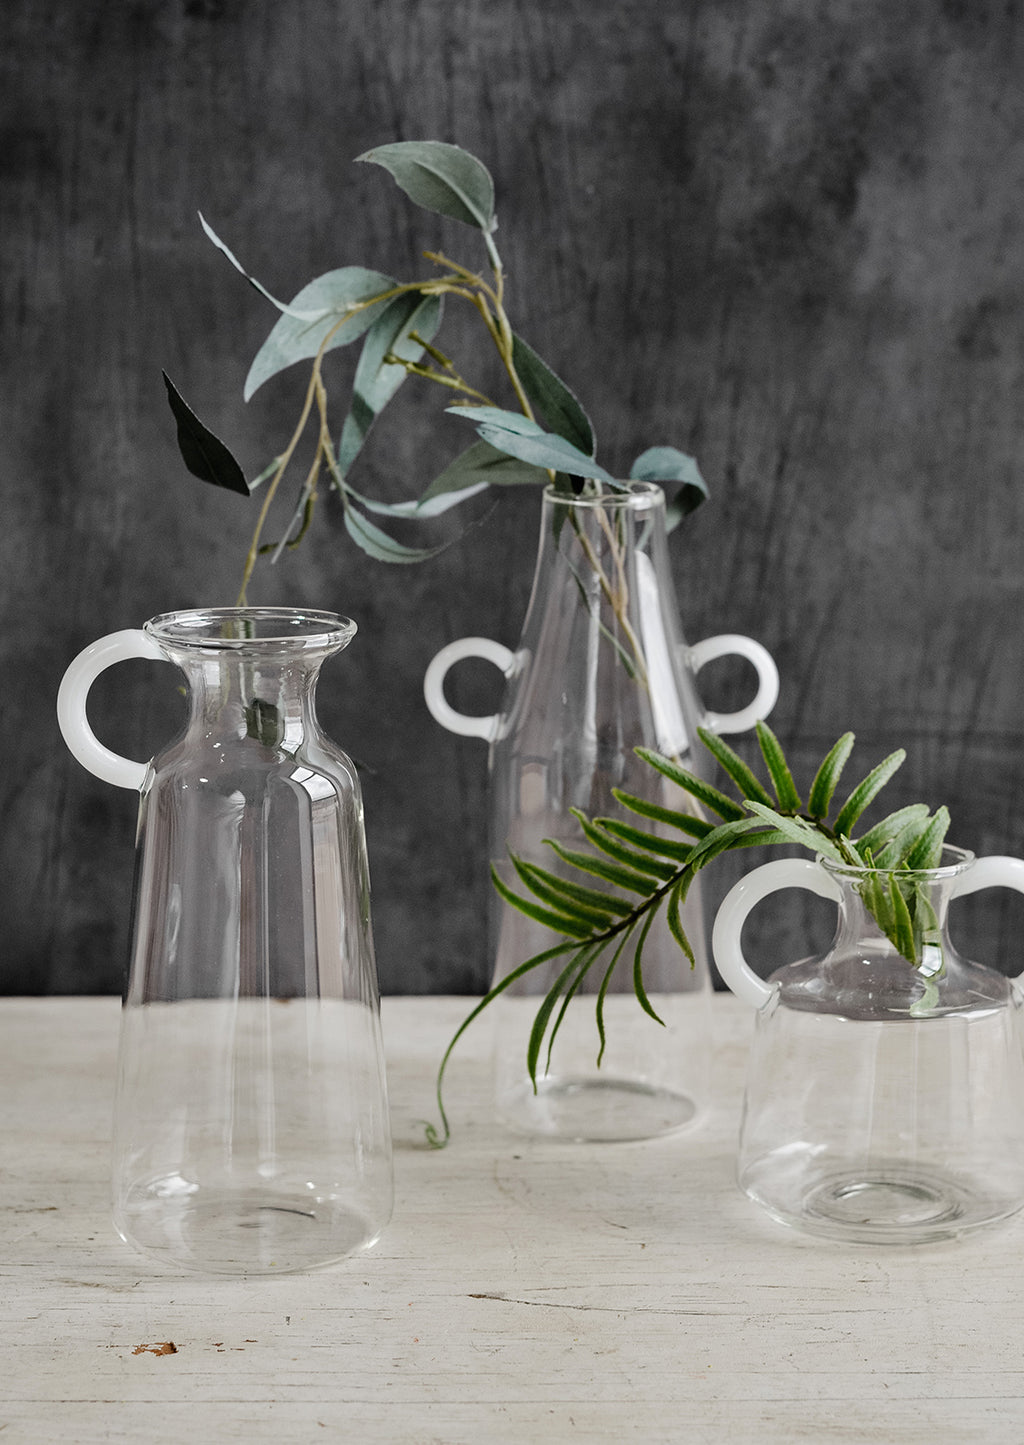 1: A trio of glass vases with white curved handles, displaying greenery.